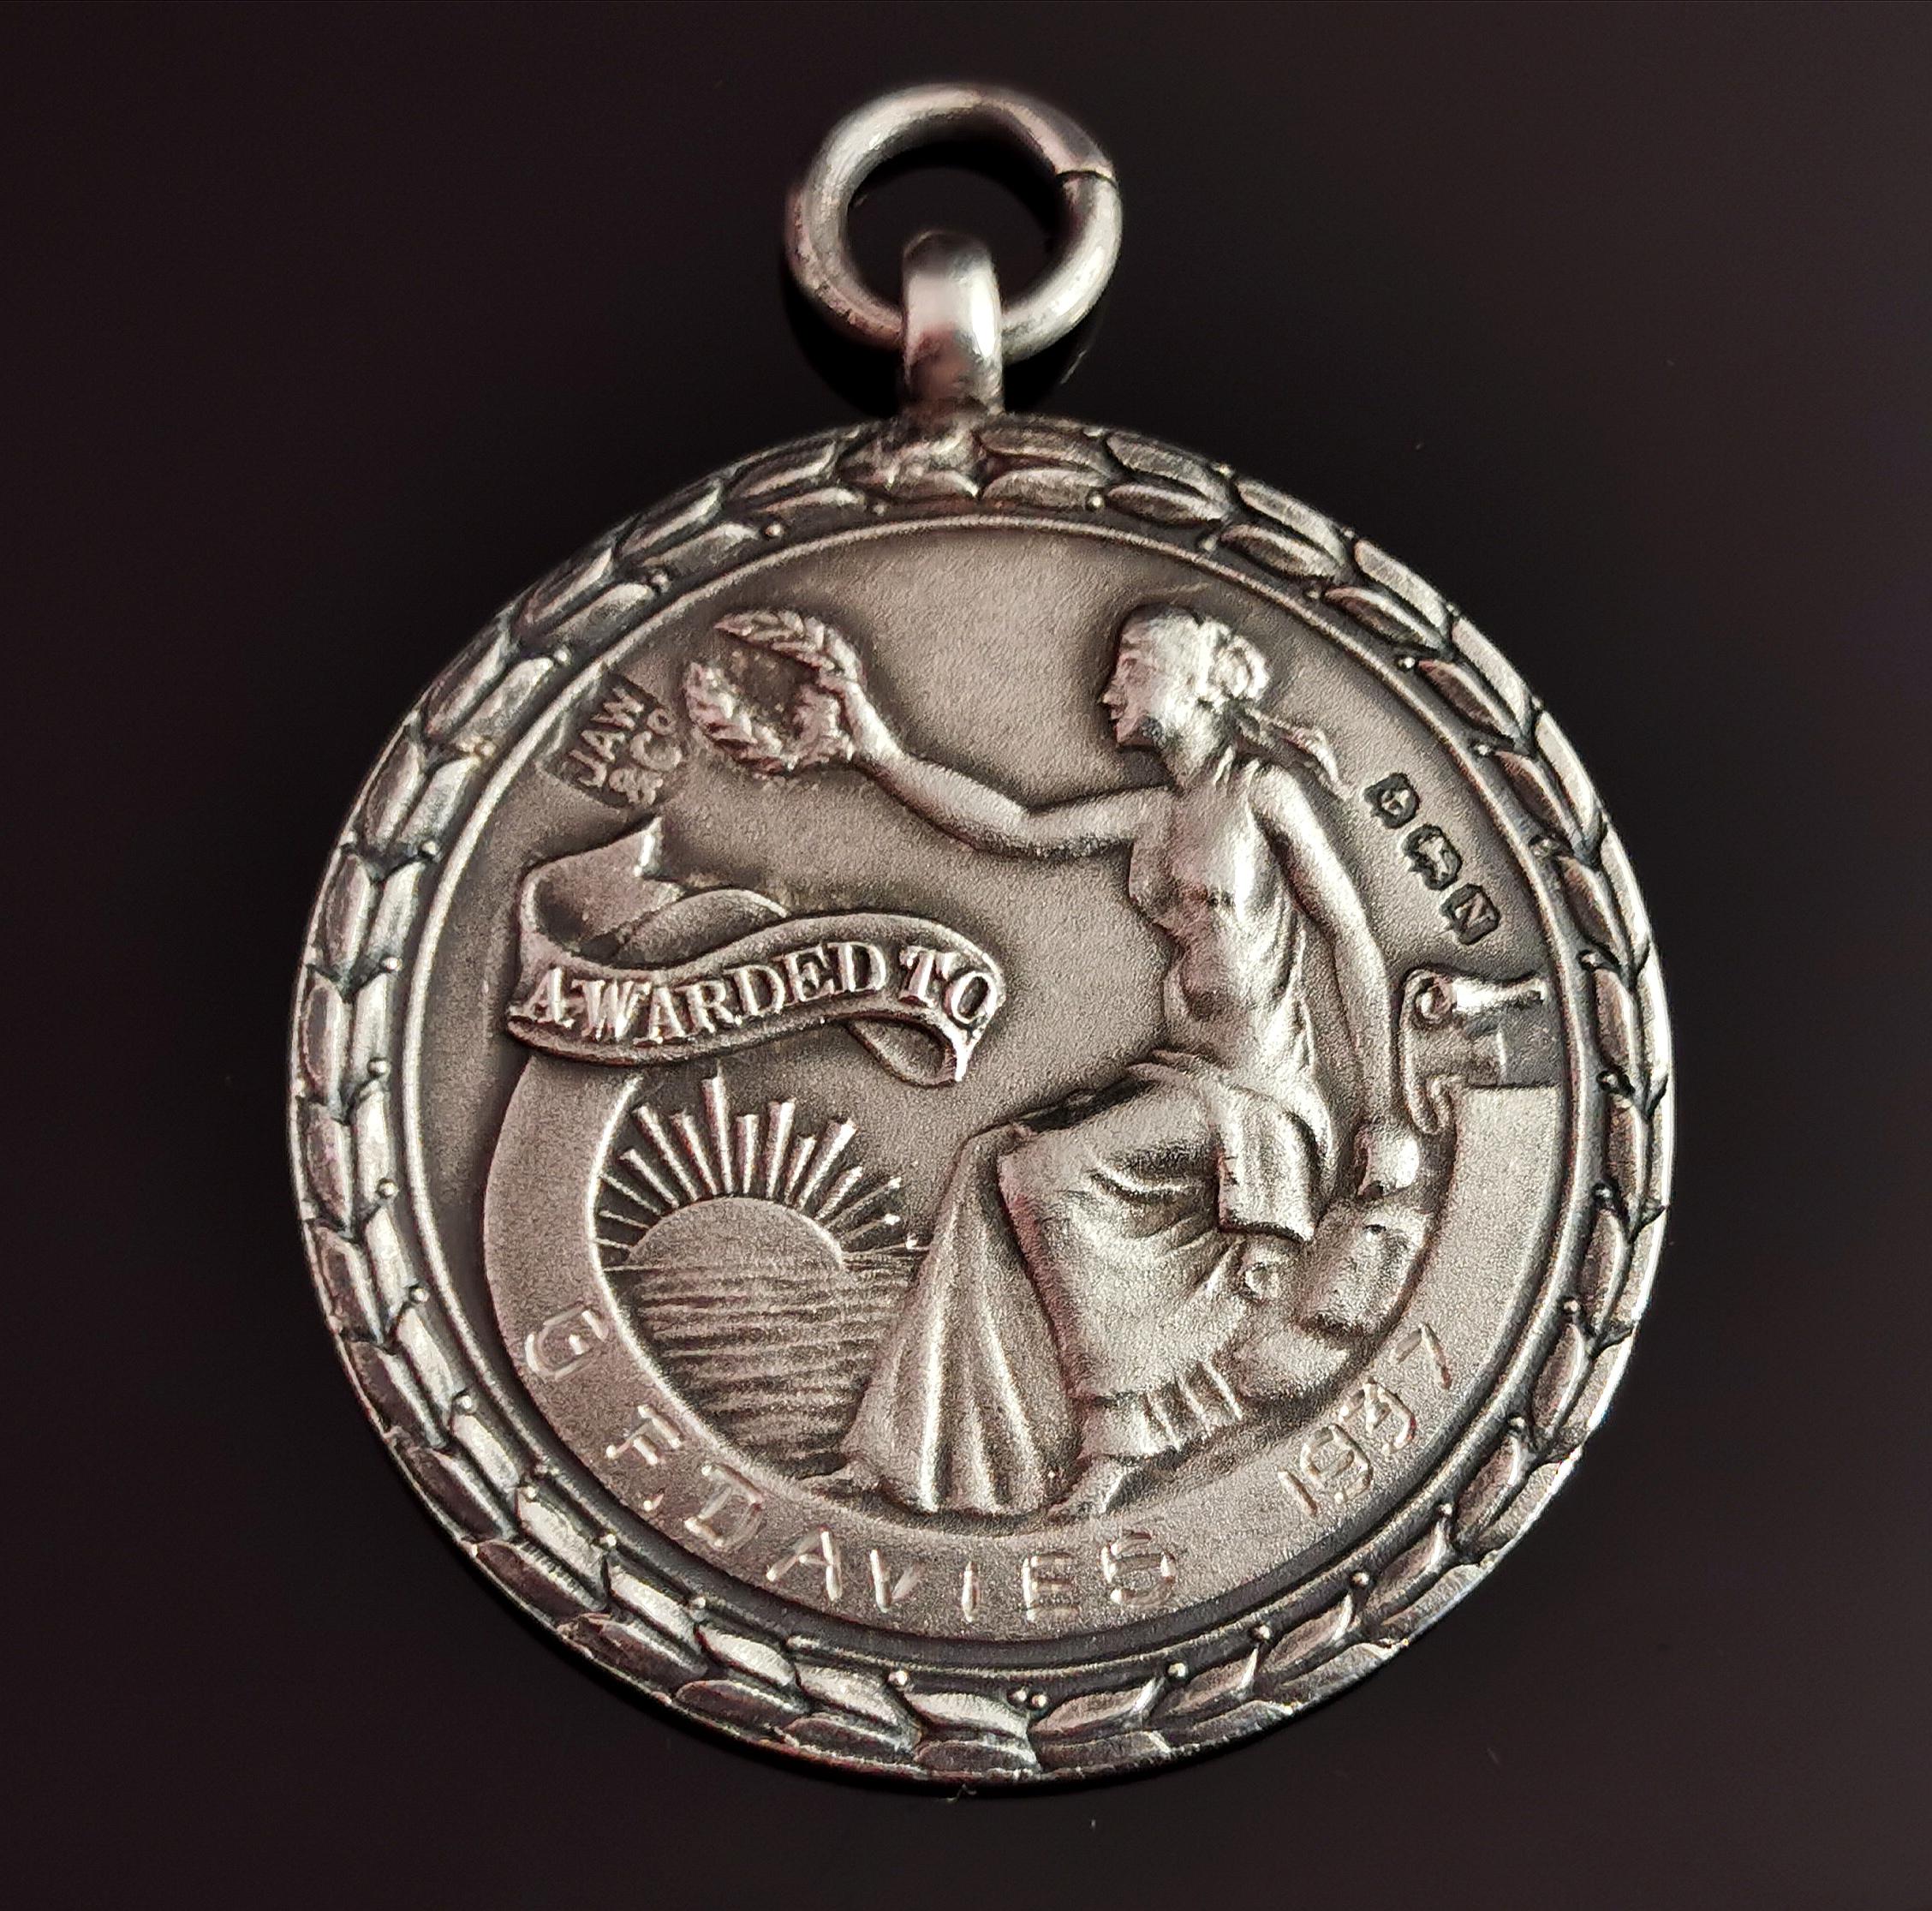 A rare vintage sterling silver watch fob pendant.

Watch fobs were traditionally attached to Albert chains and were used as commemorative pieces, awards and also produced as medals.

This is a rare vintage fob, very well designed on each side with